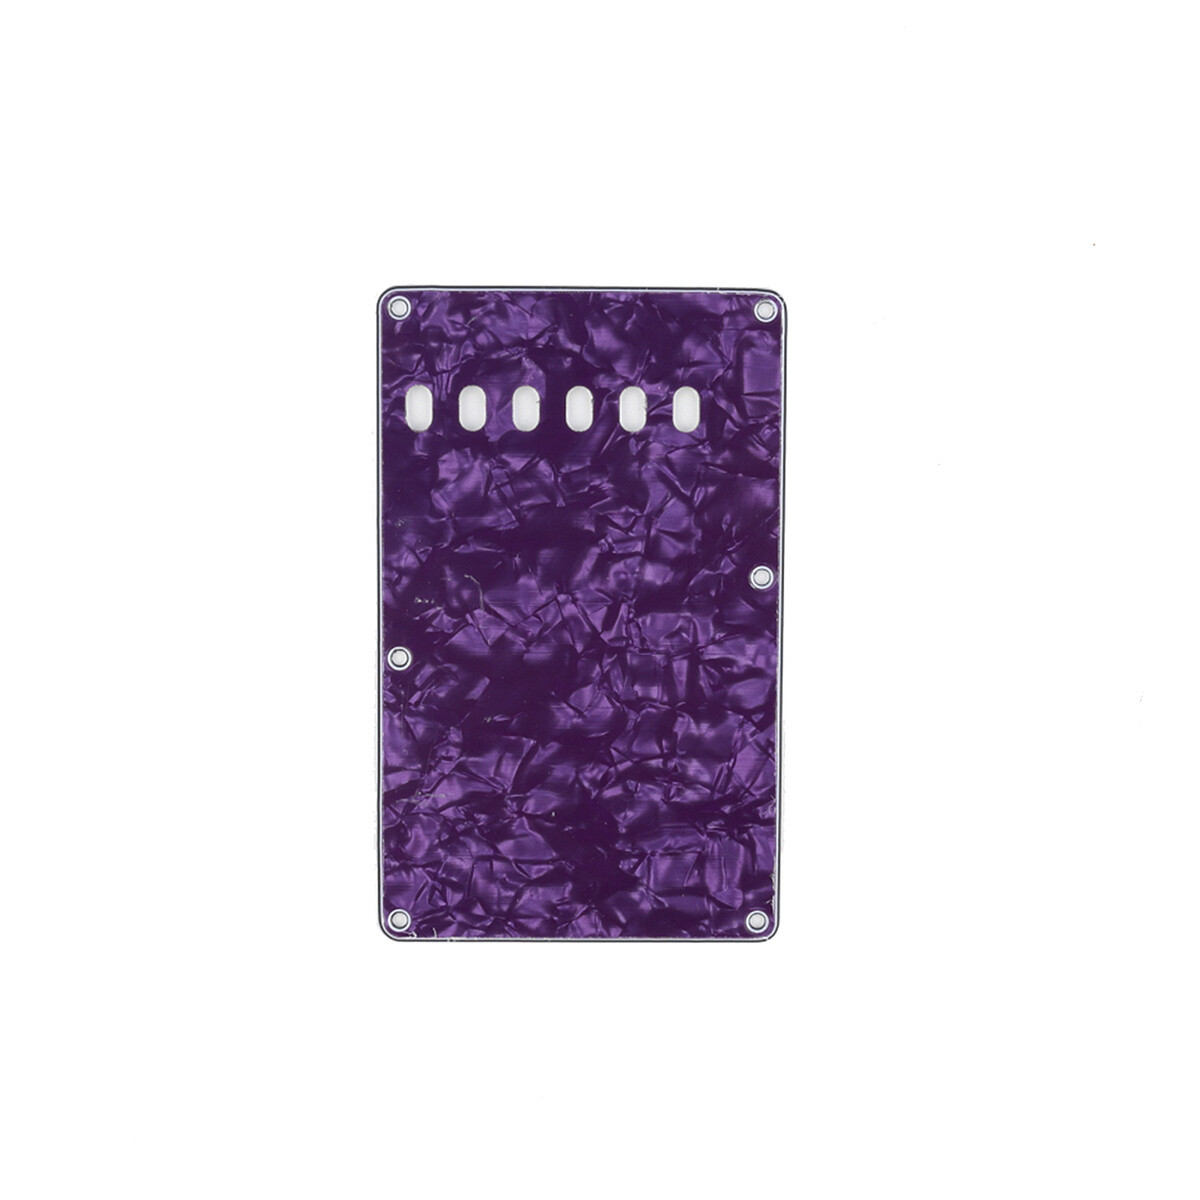 Brio Pearl Purple Vintage Style Back Plate Tremolo Cover 4 ply - US/Mexican Fender®Strat® Fit